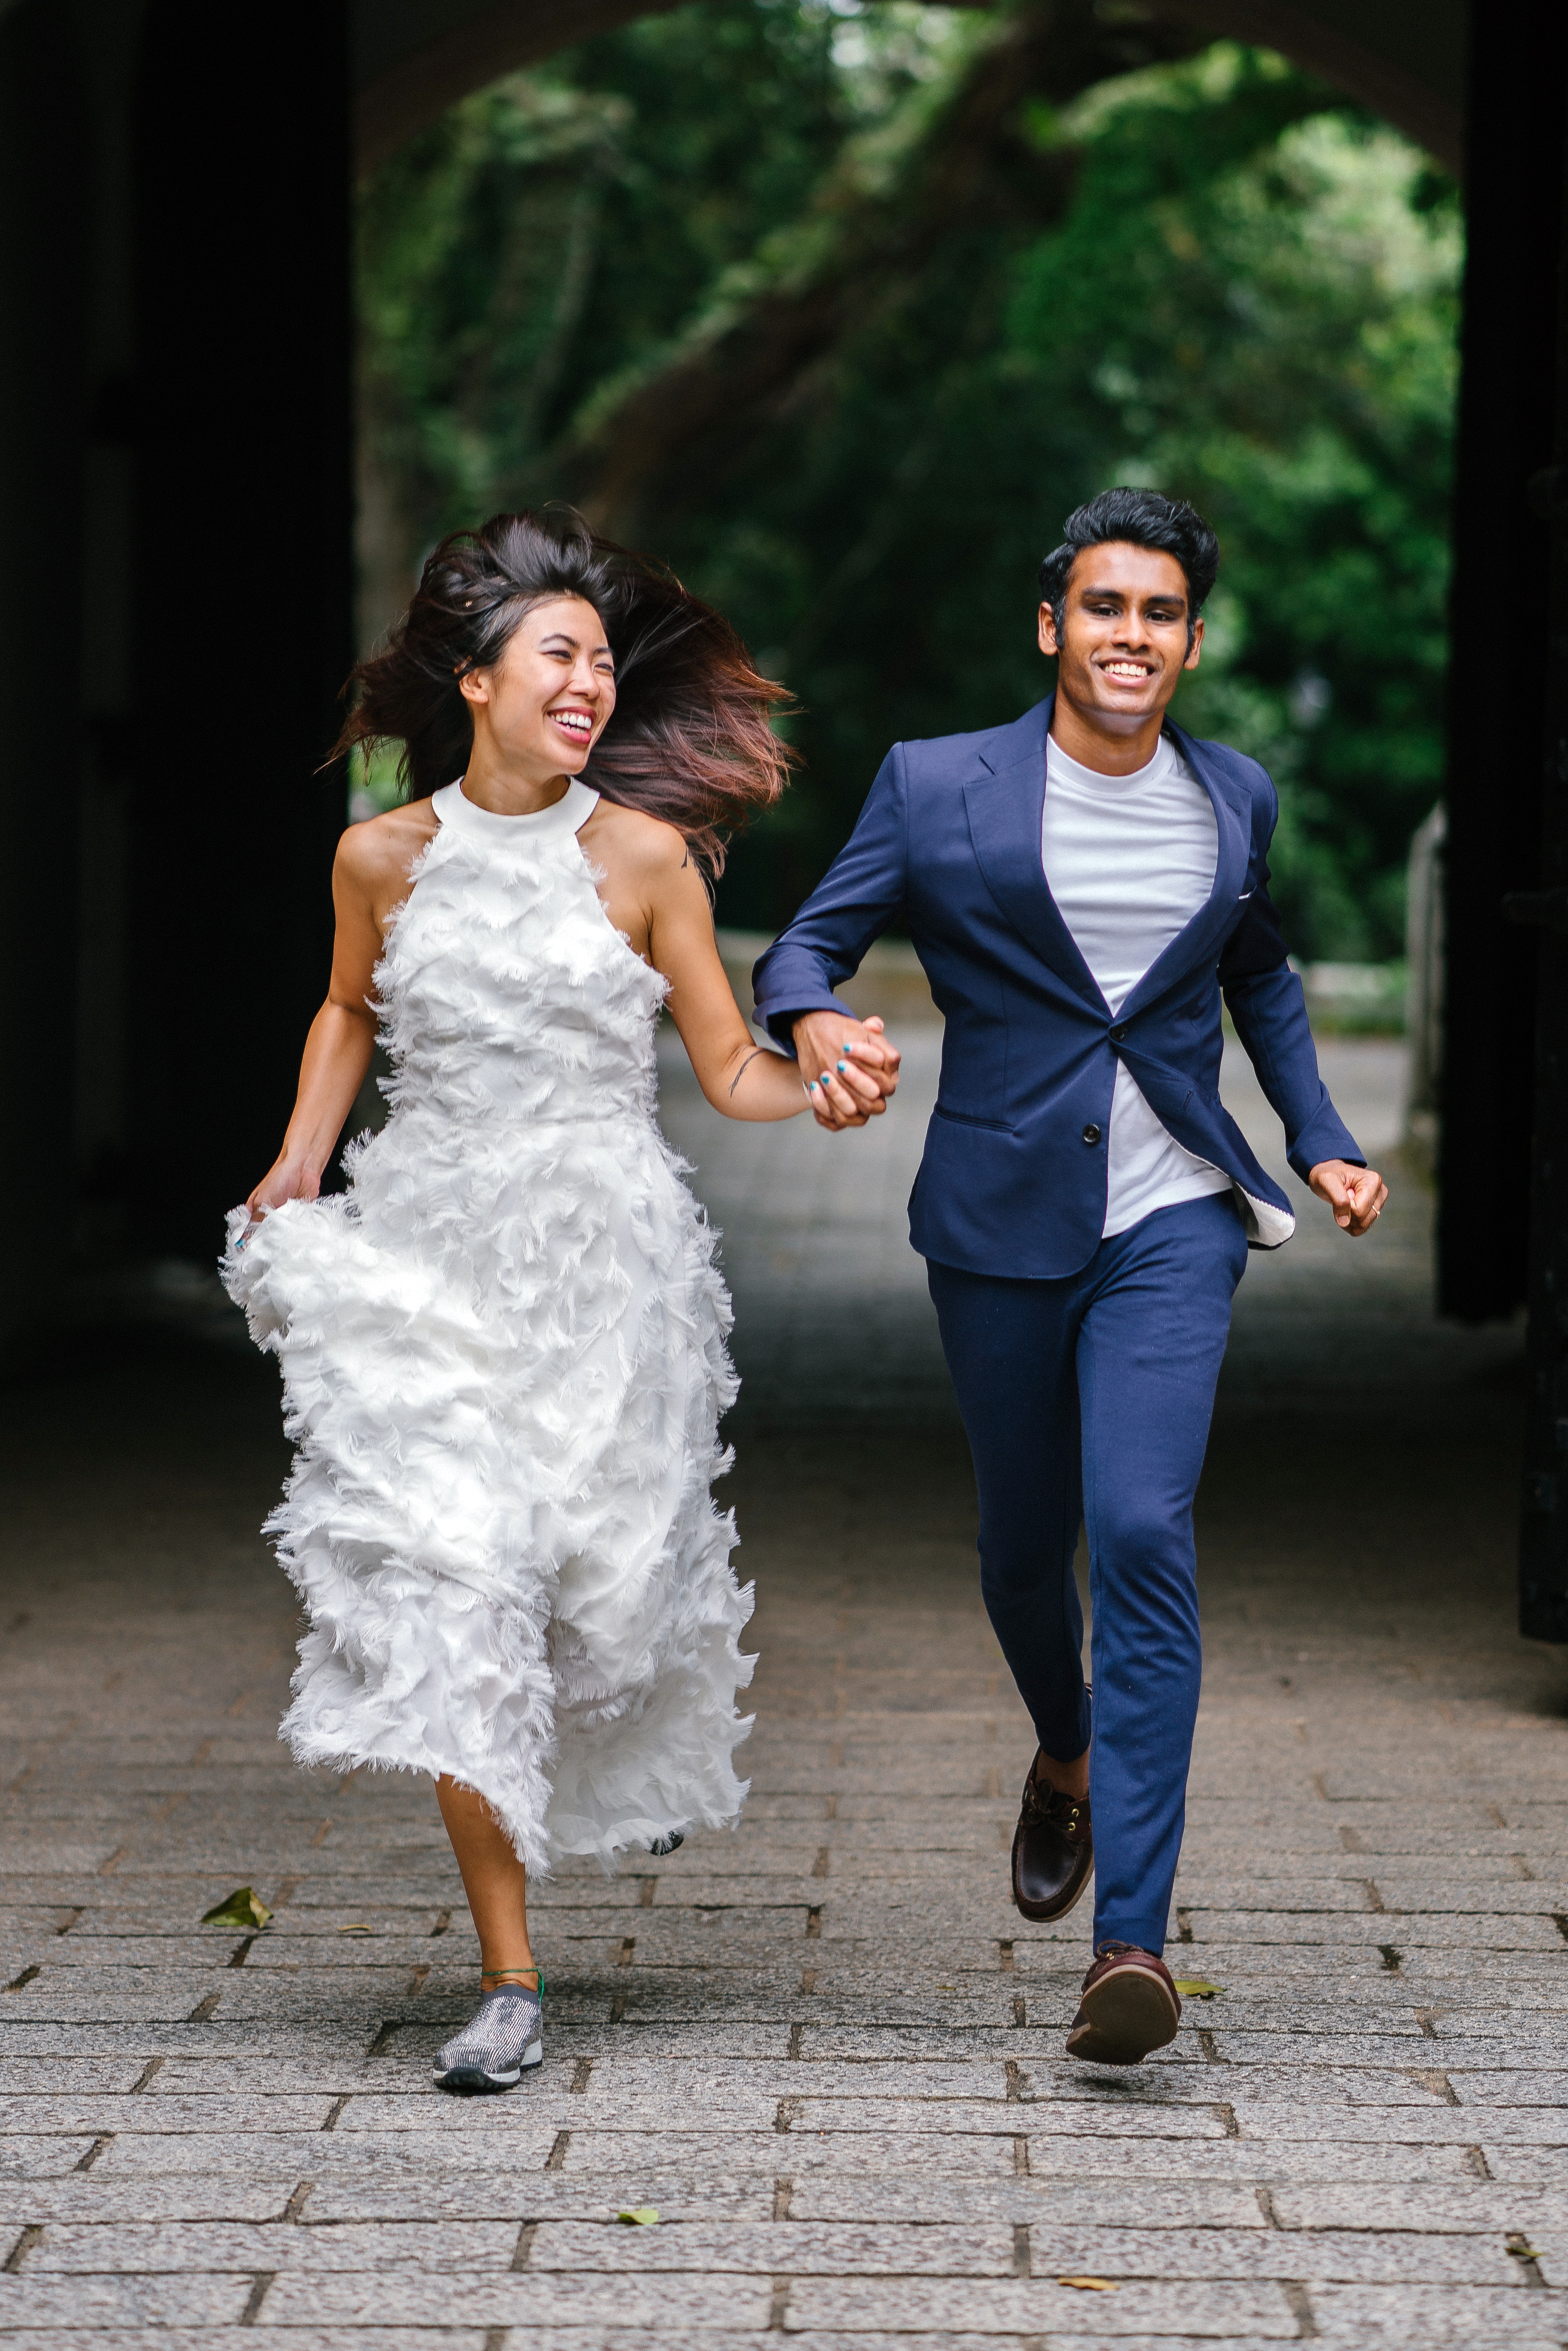 Bride and groom running on concrete pathway photo